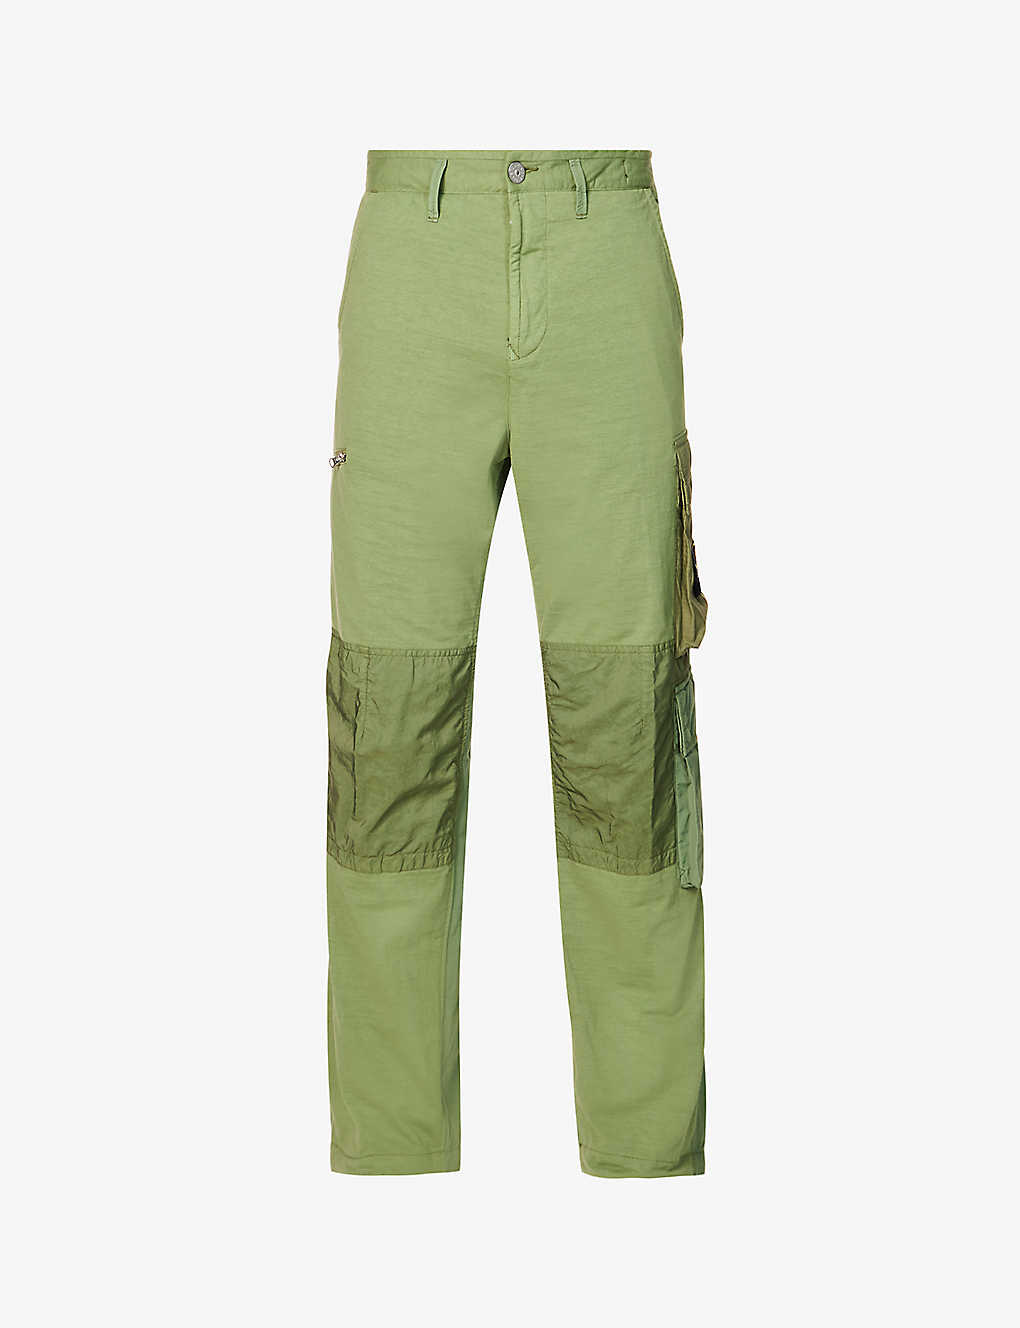 STONE ISLAND STONE ISLAND MEN'S SAGE CONTRAST PANEL BRAND-PATCH STRAIGHT-LEG RELAXED-FIT WOVEN TROUSERS,65436418